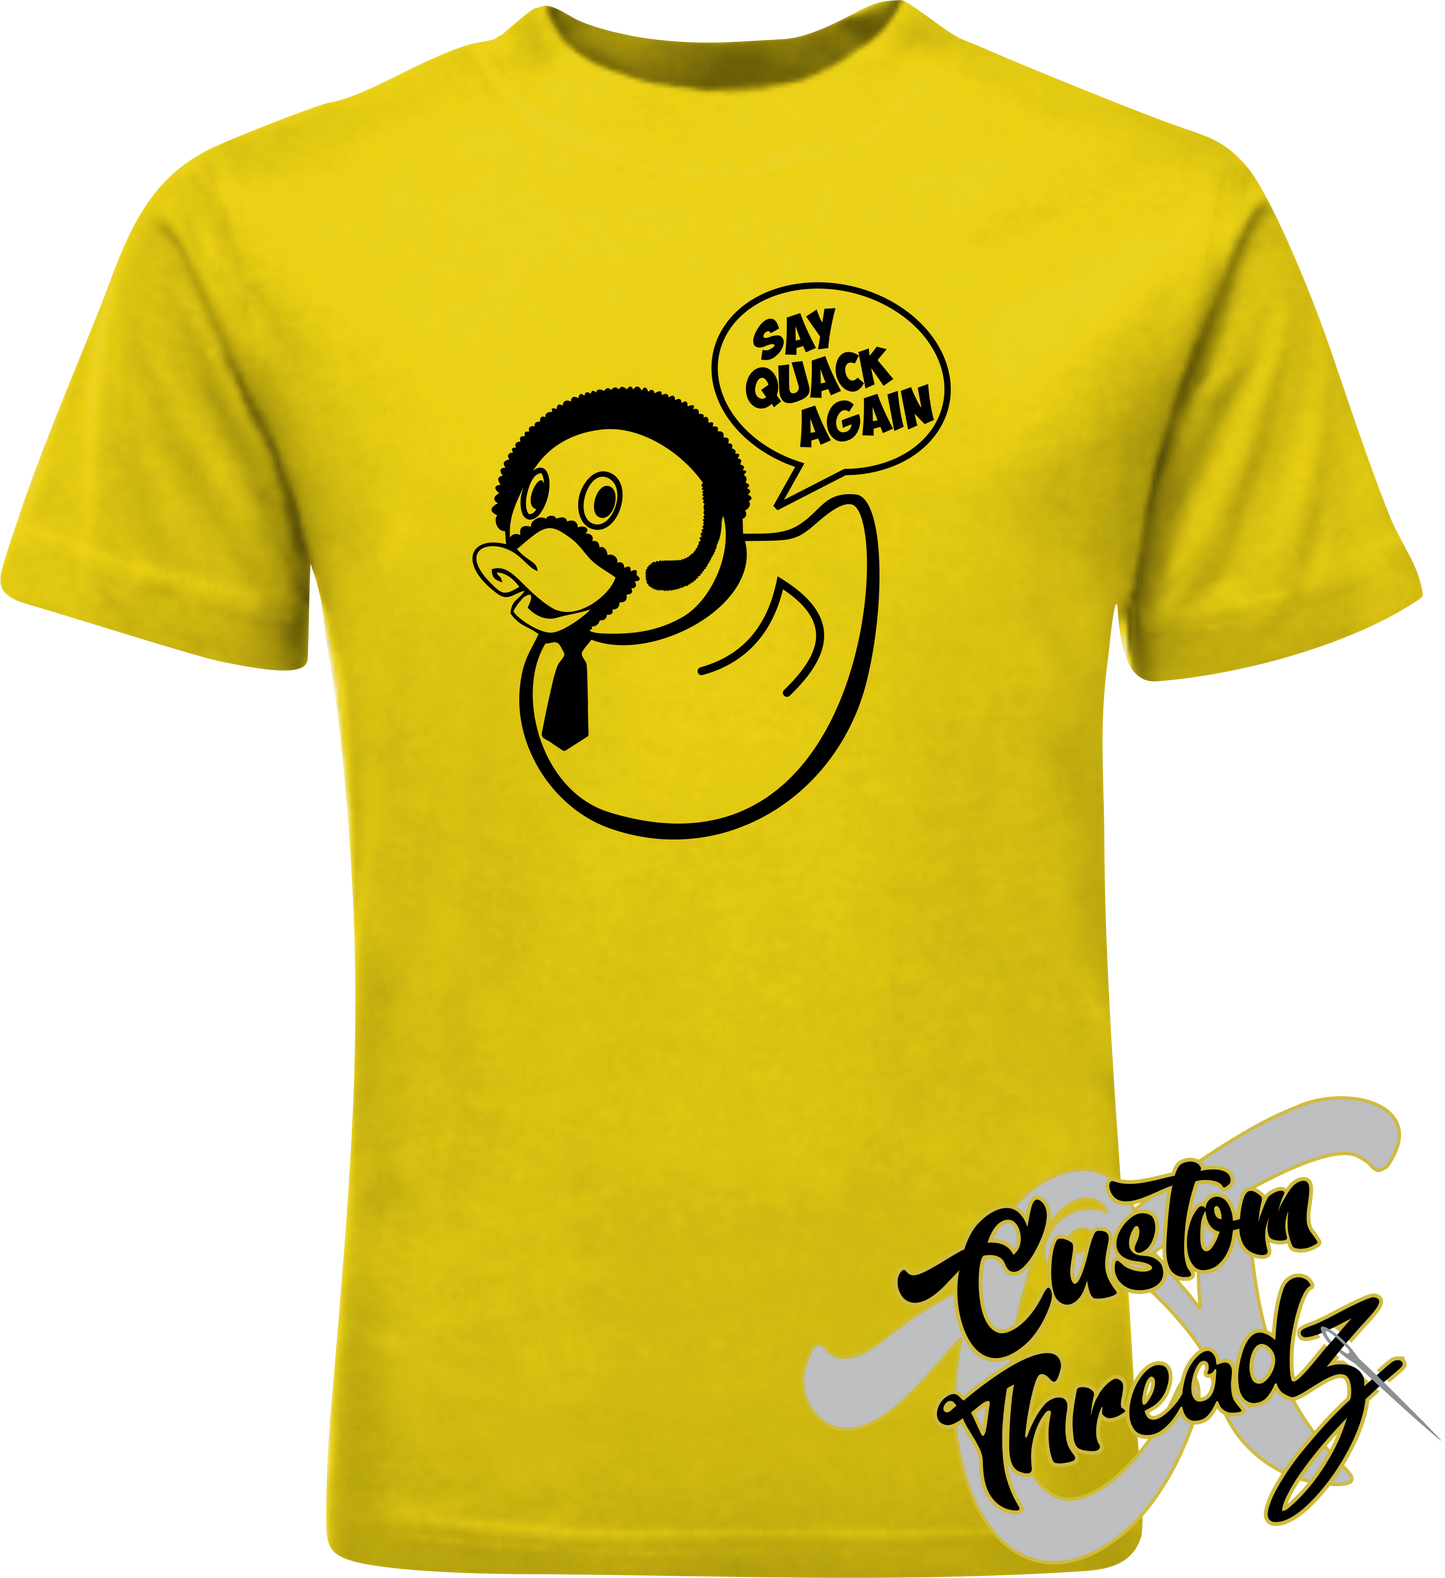 yellow youth tee with say quack again pulp fiction spoof rubber duck DTG printed design